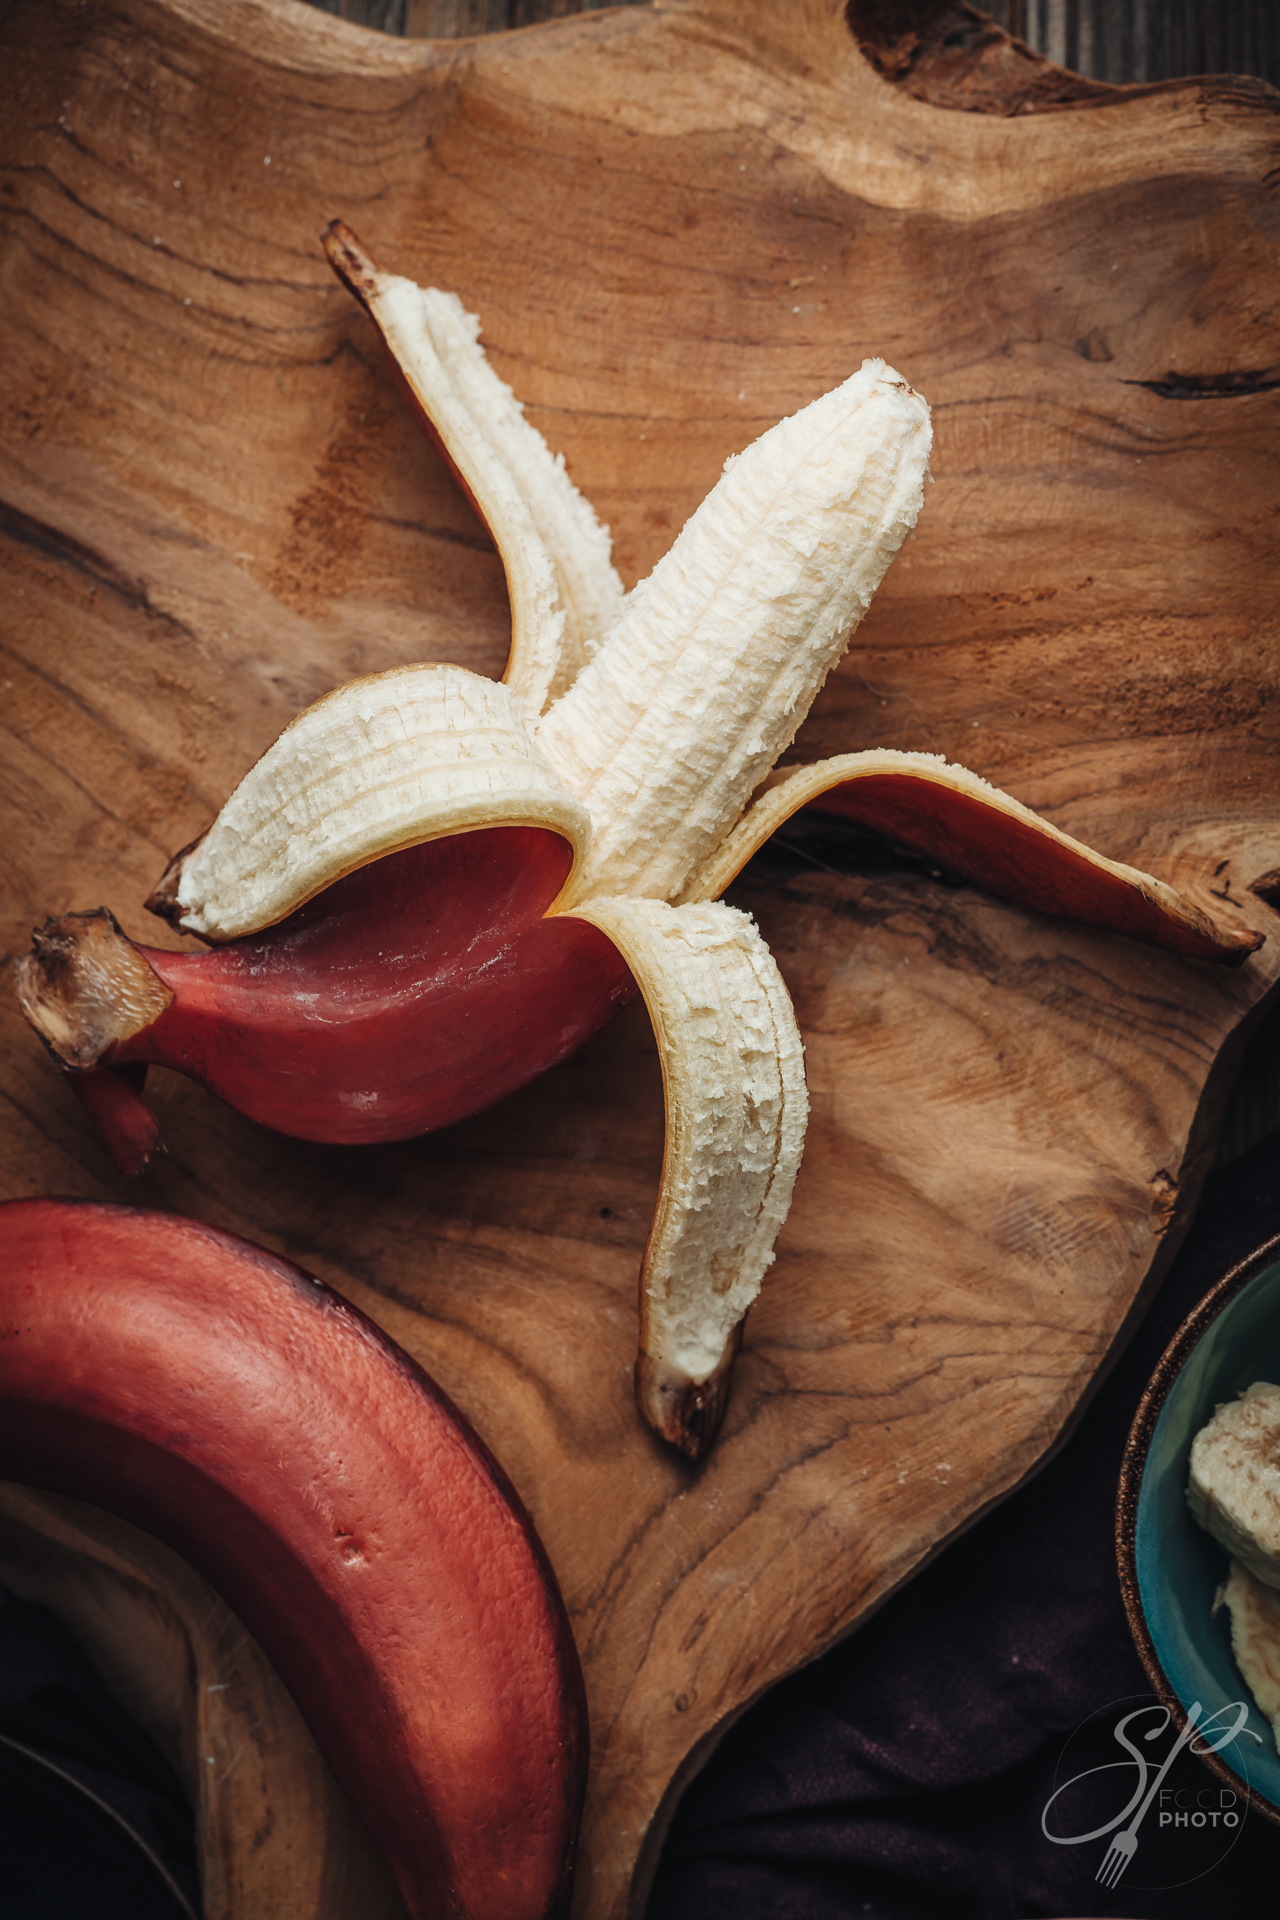 Fresh raw red bananas from South America